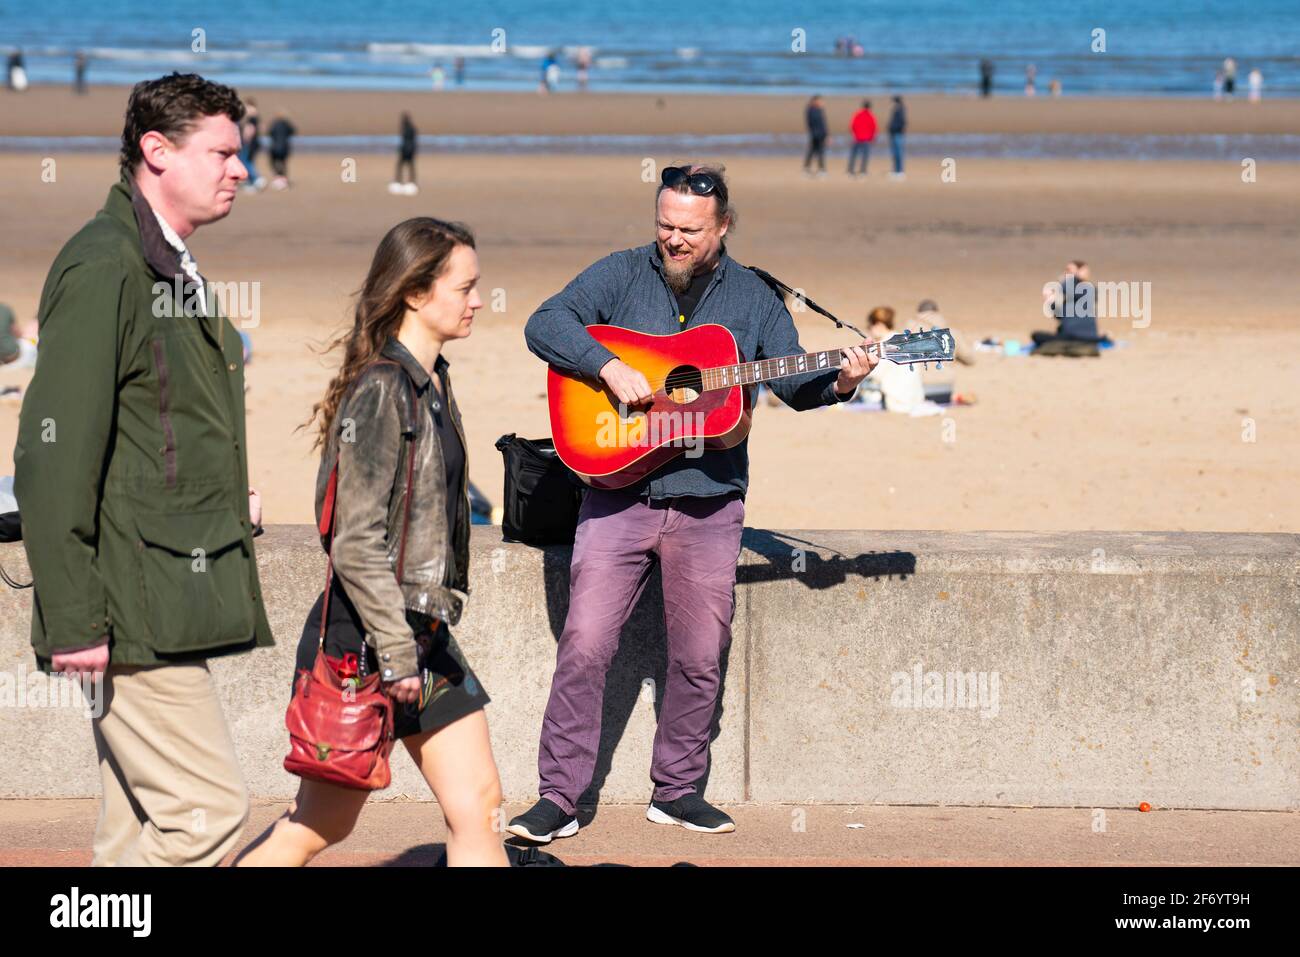 Portobello, Scotland, UK. 3 April 2021. Easter weekend crowds descend on Portobello beach and promenade to make the most of newly relaxed  Covid-19 lockdown travel restrictions and warm sunshine with uninterrupted blue skies. Pic;  Buskers have returned. Iain Masterton/Alamy Live News Stock Photo